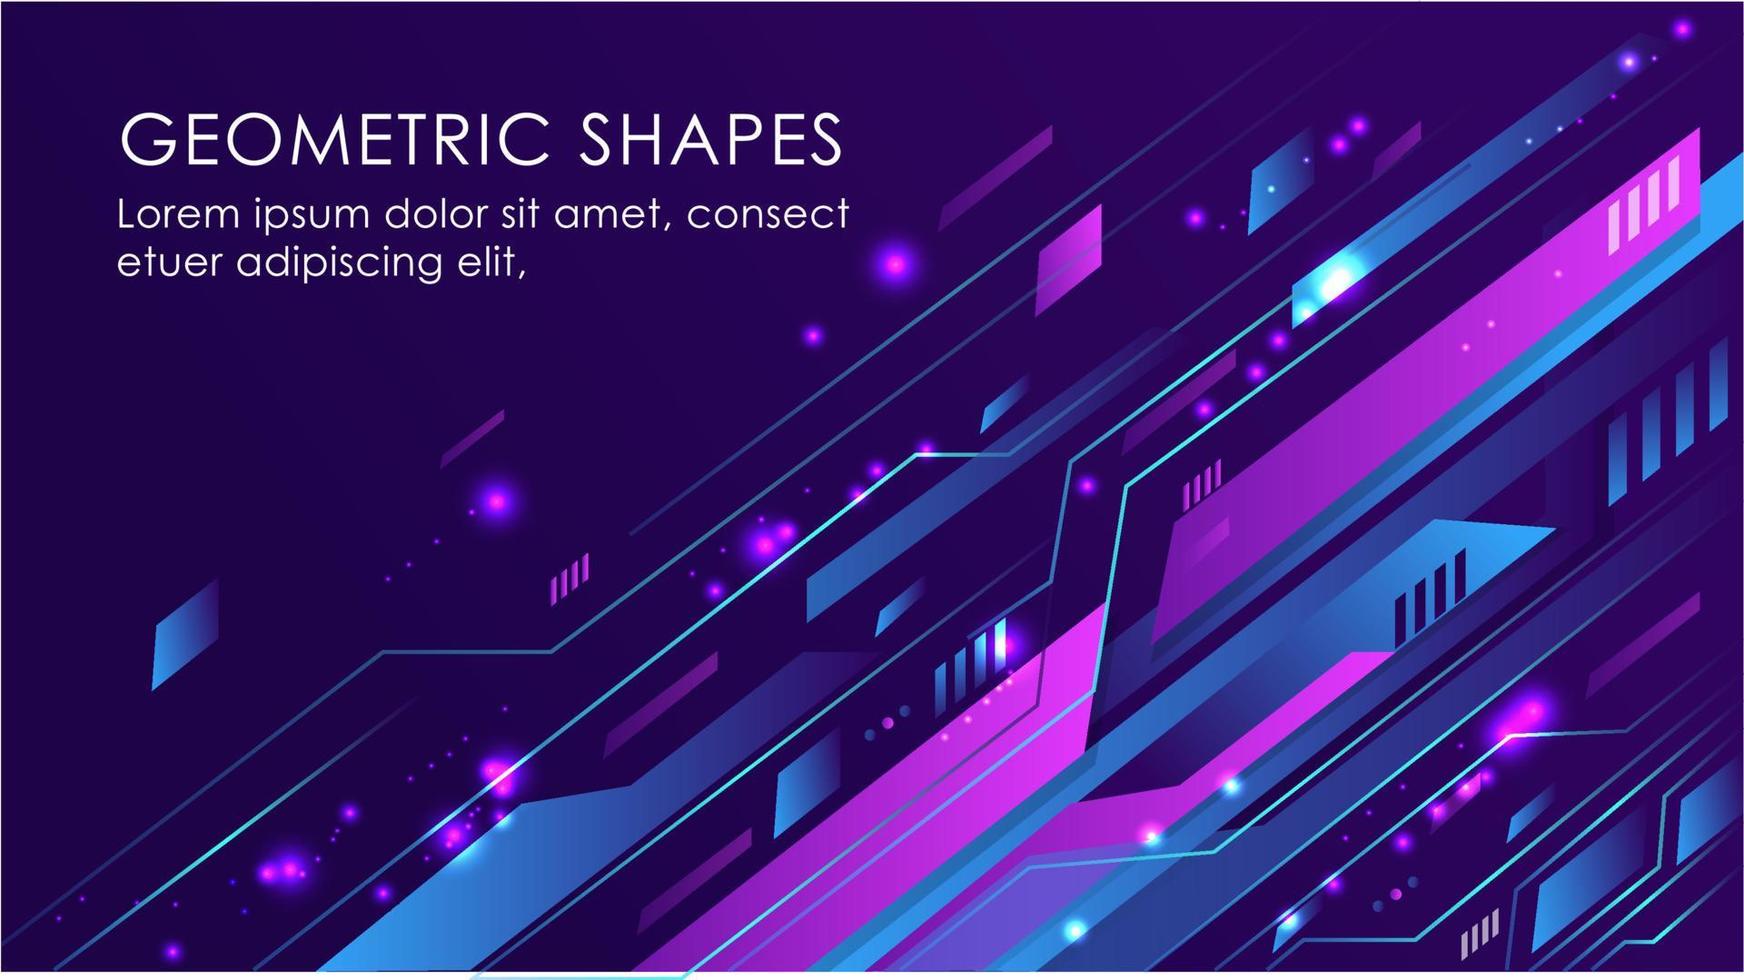 Creative geometric shapes abstract  colorful background vector